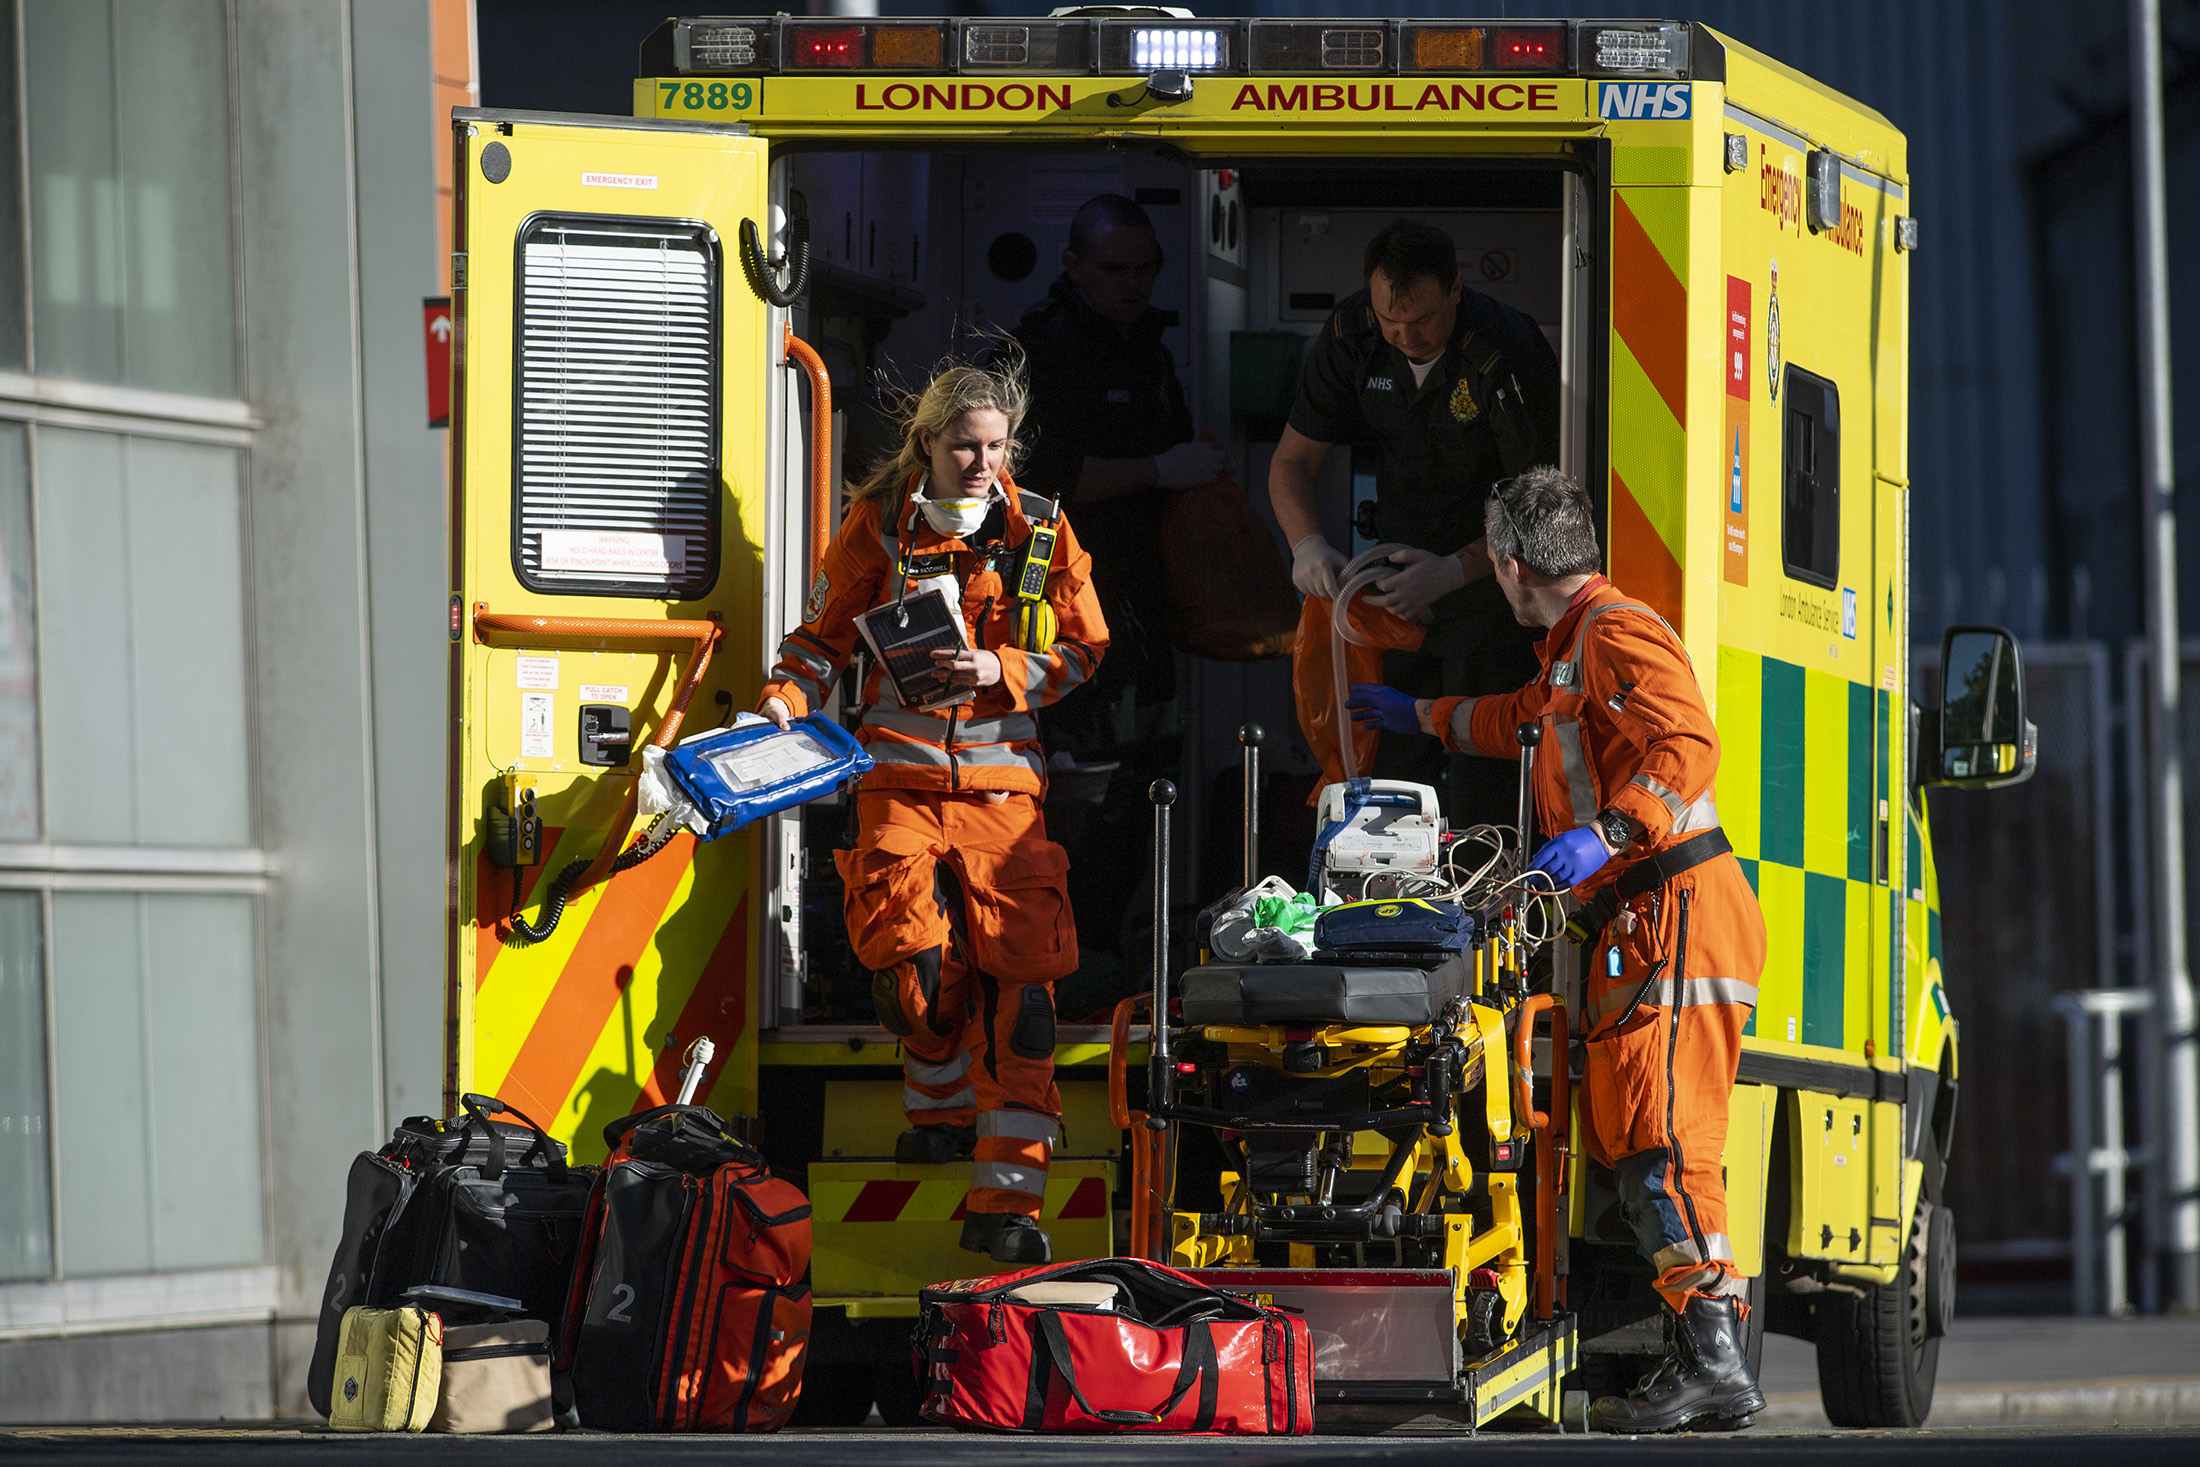 Paramedics and Doctors from the London Air Ambulance prepare an ambulance outside the Royal London Hospital on April 20.